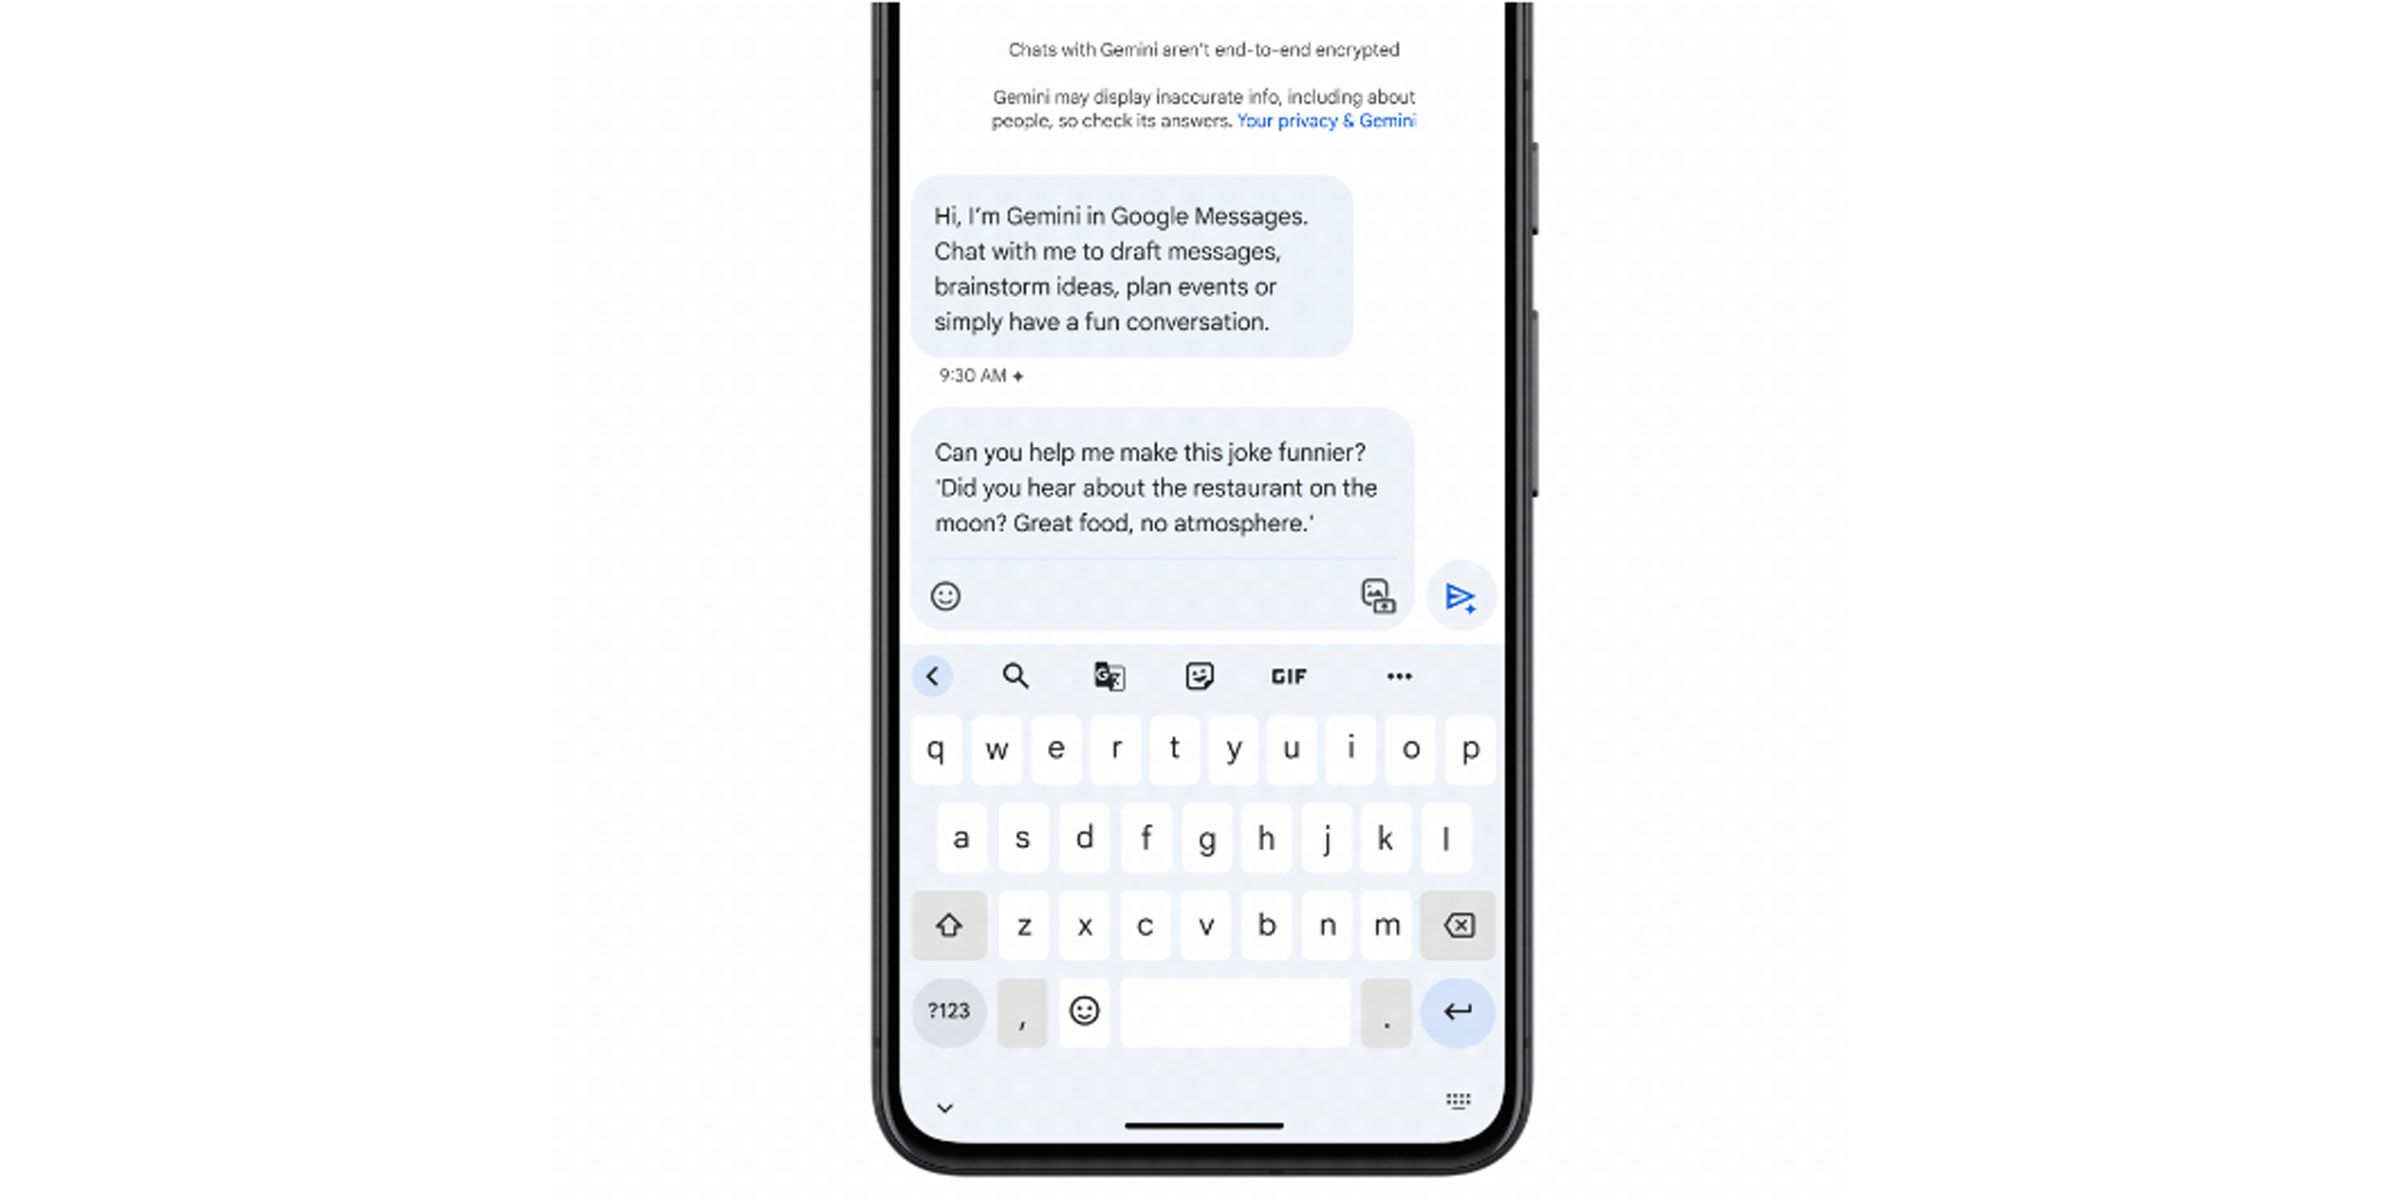 Google Messages with Gemini AI integrated